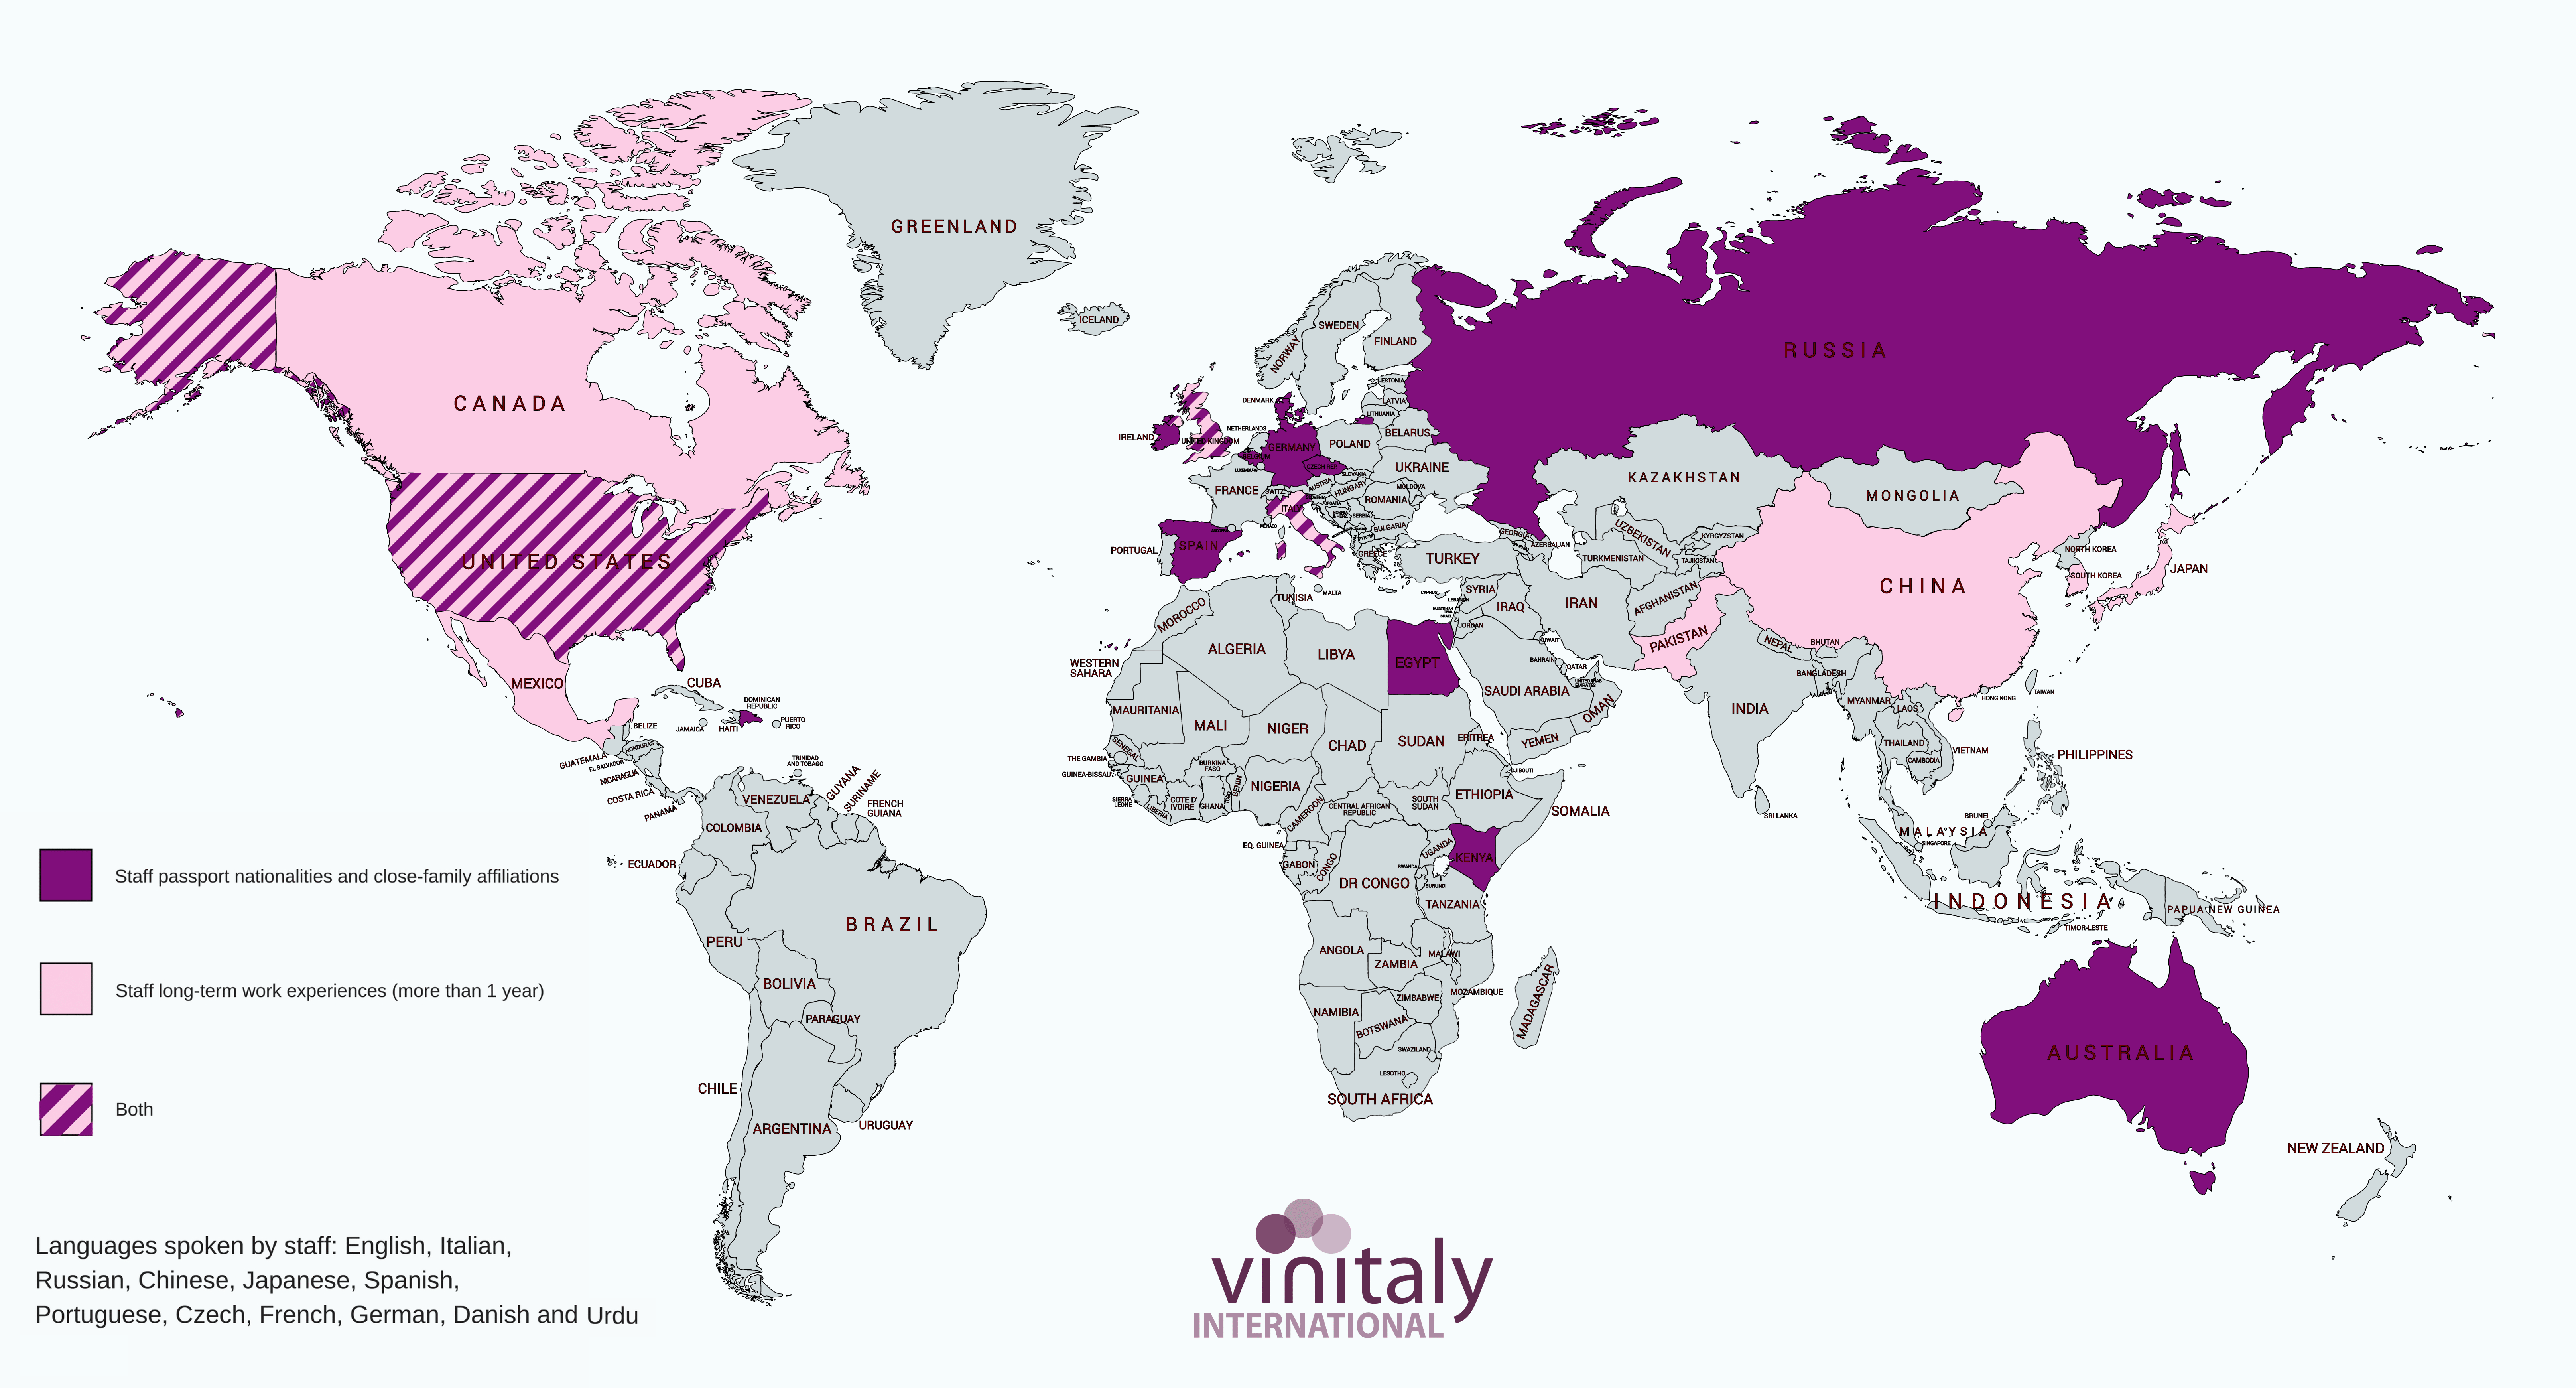 Vinitaly International Infographic 2 - map of staff's origin, culture, and language